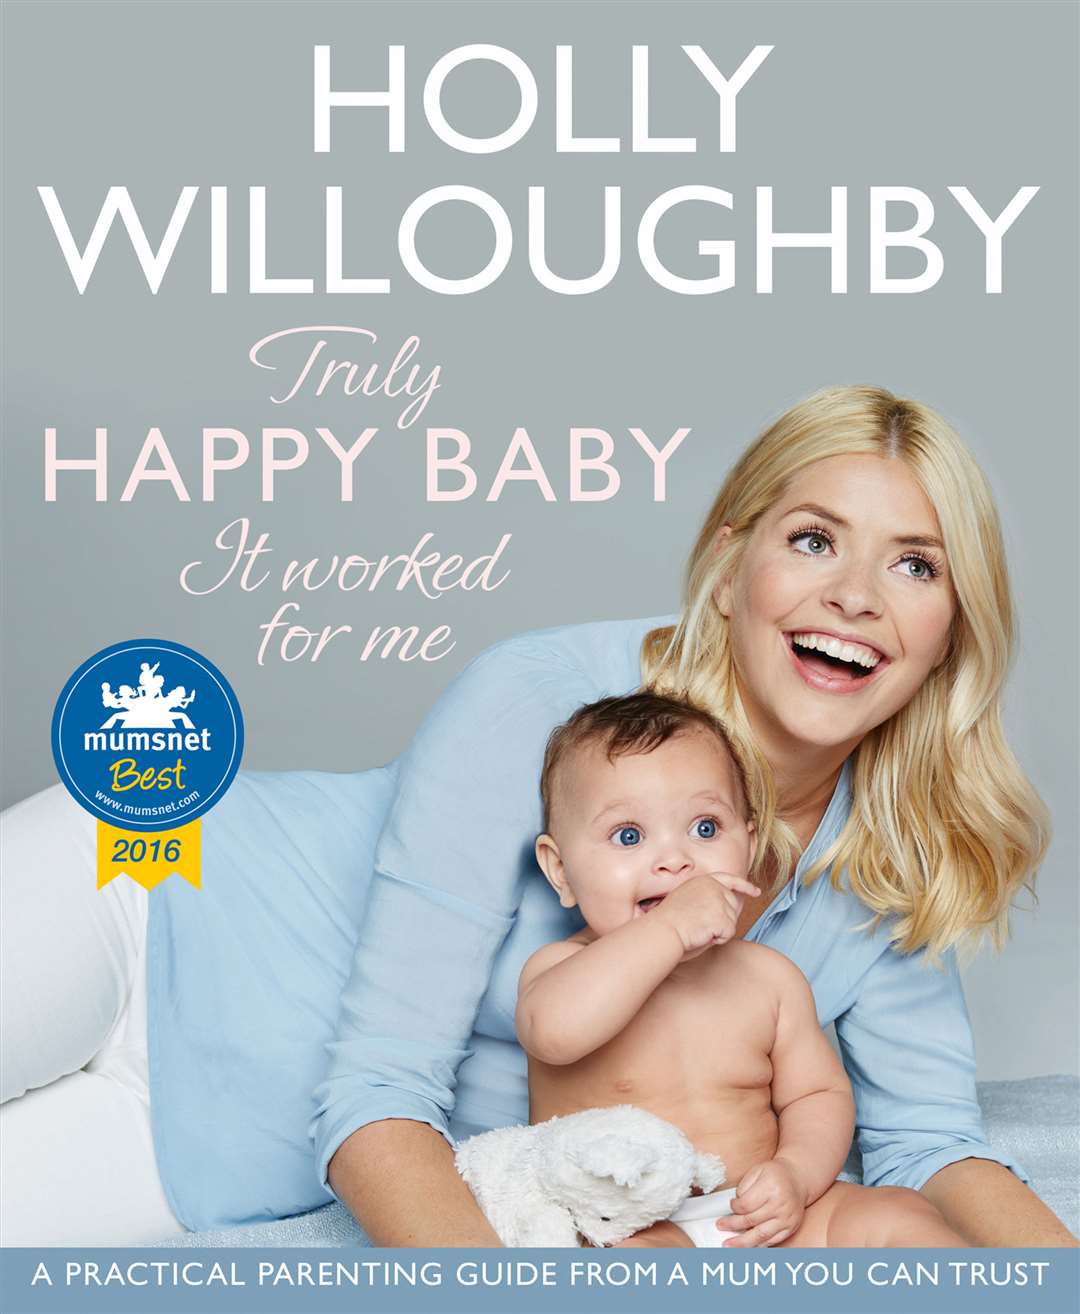 Truly Happy Baby: It Worked For Me by Holly Willoughby is out now